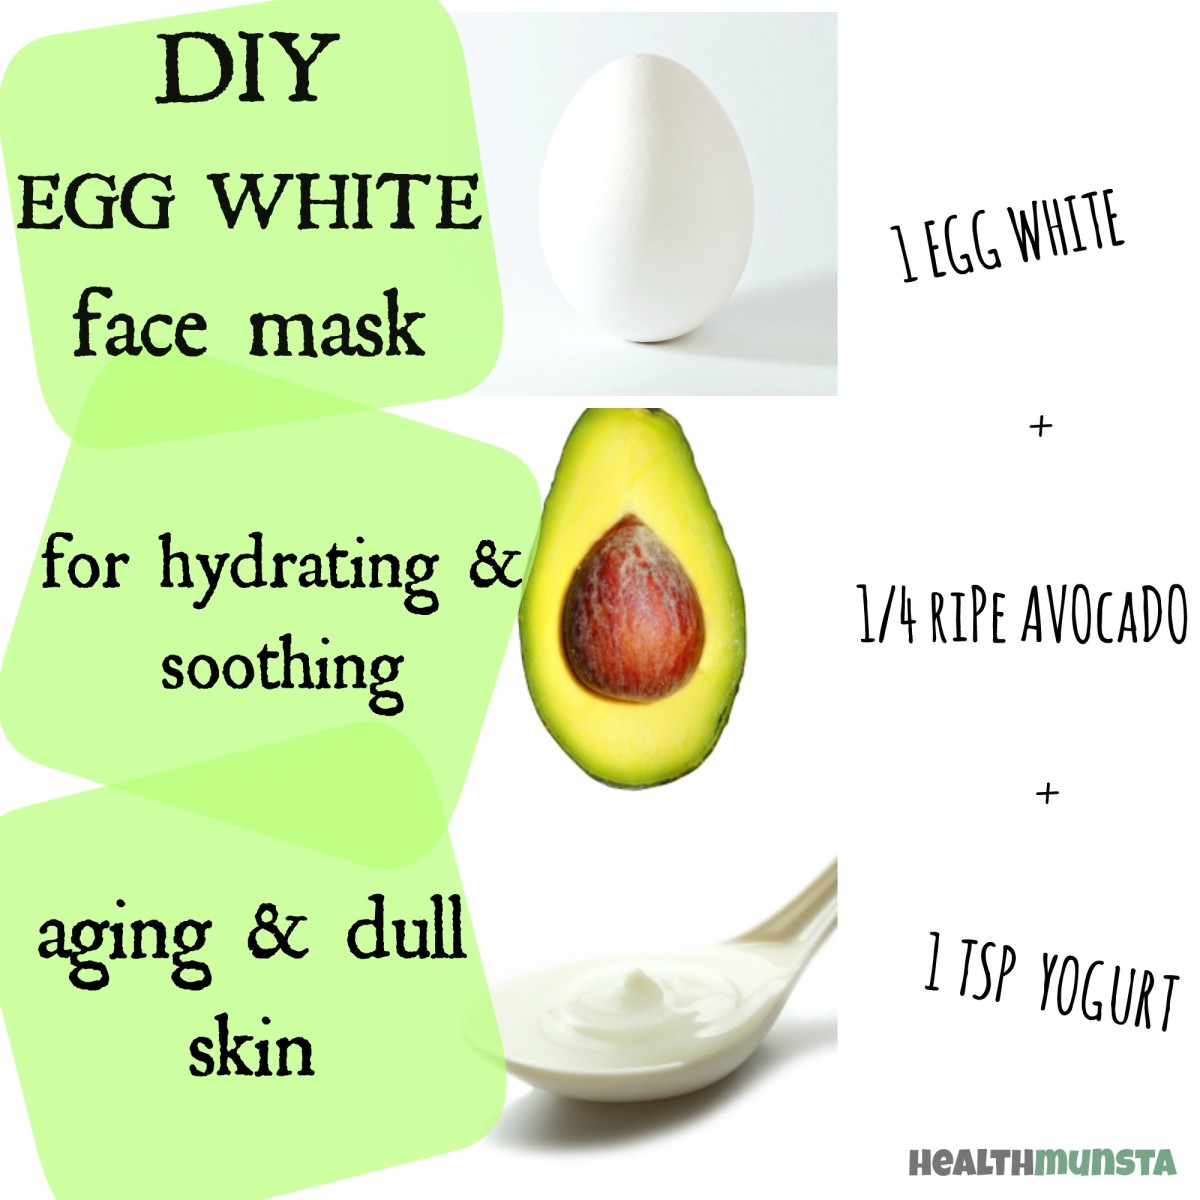 This is the perfect egg white face mask for aging skin. It helps smooth out wrinkles and hydrate aging skin, making it look youthful. Image edited by healthmunsta